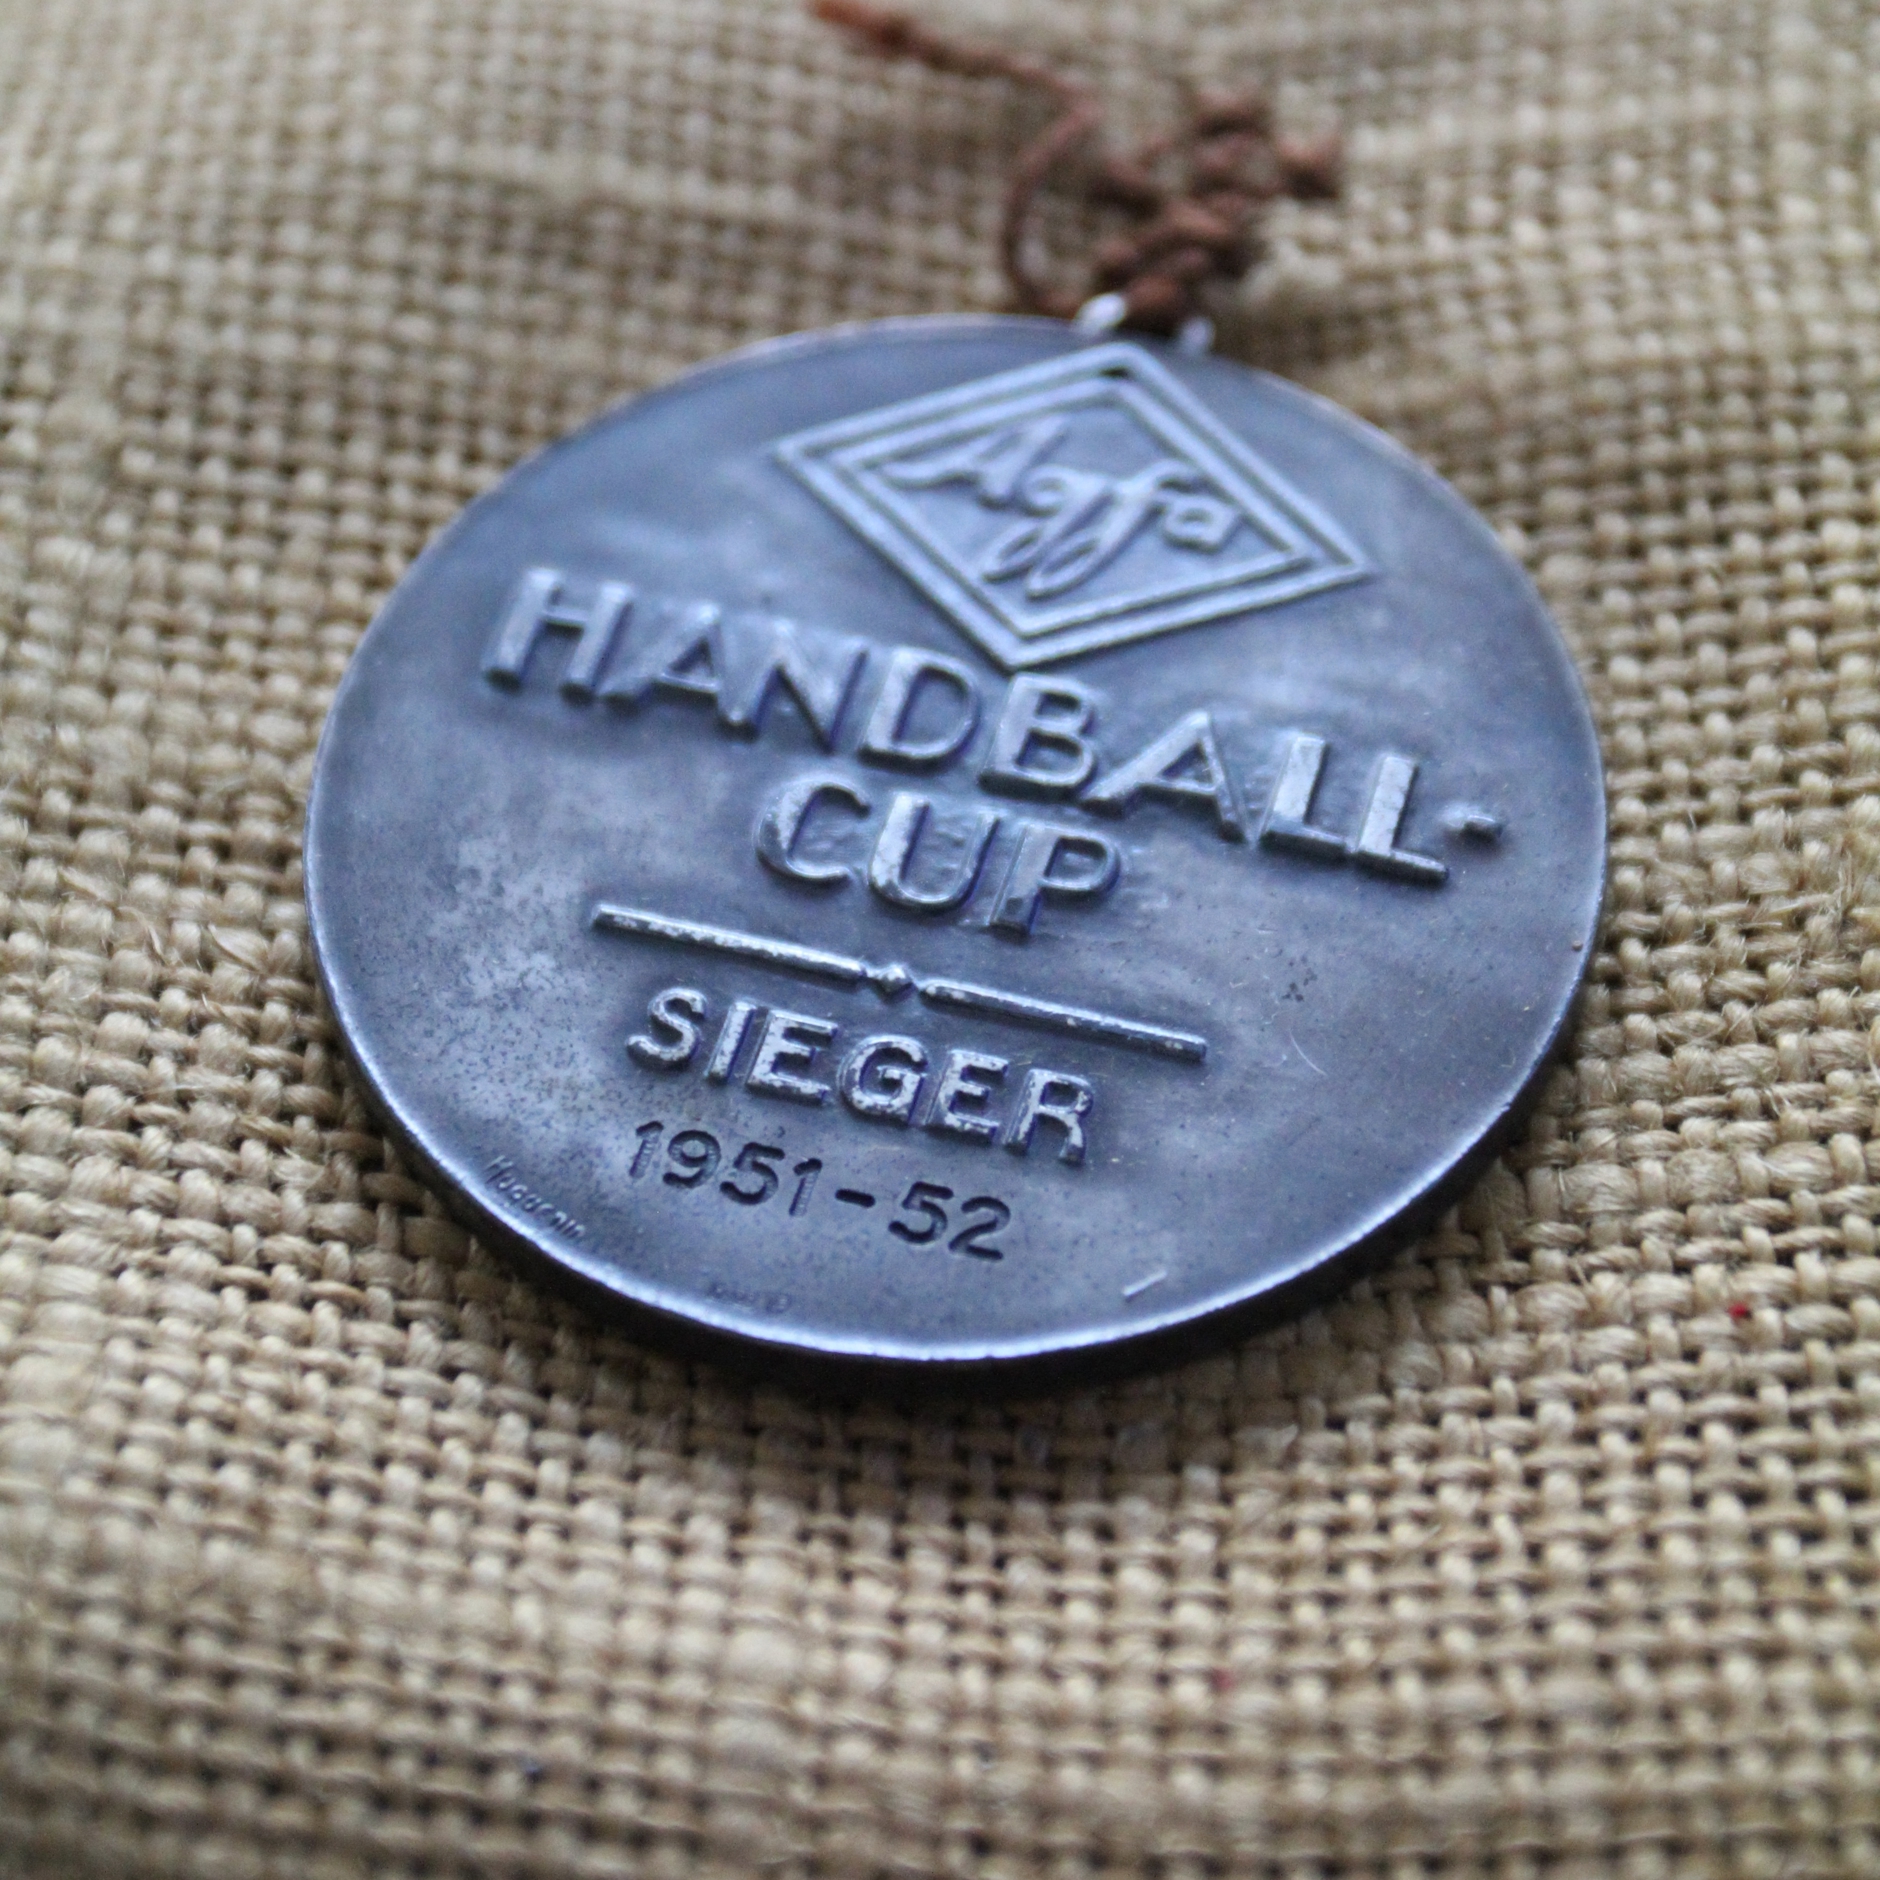 Cup Medaille 51 52